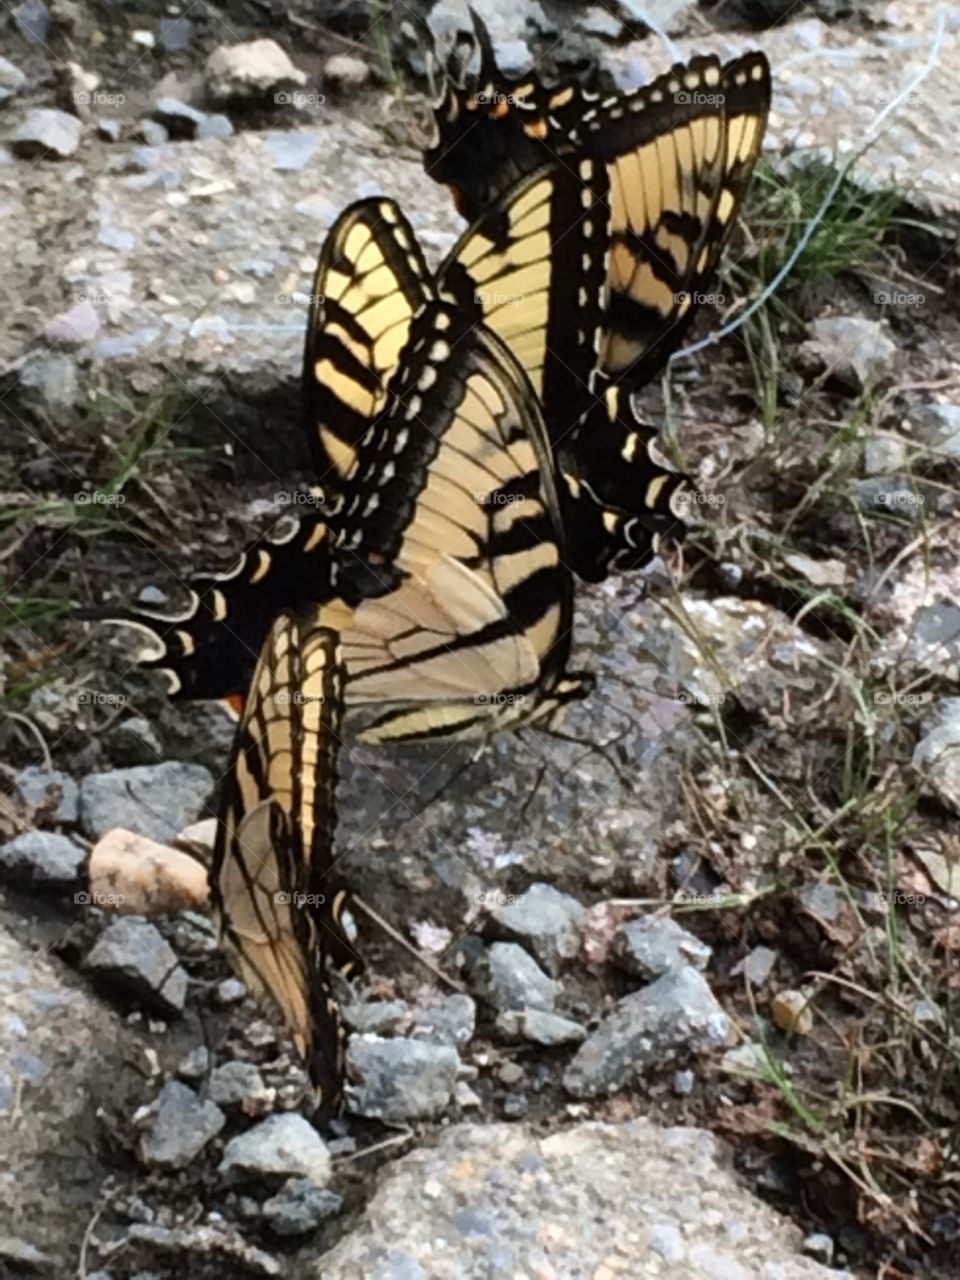 Butterflies . Hiking along a river and found these amazing butterflies gathering. 